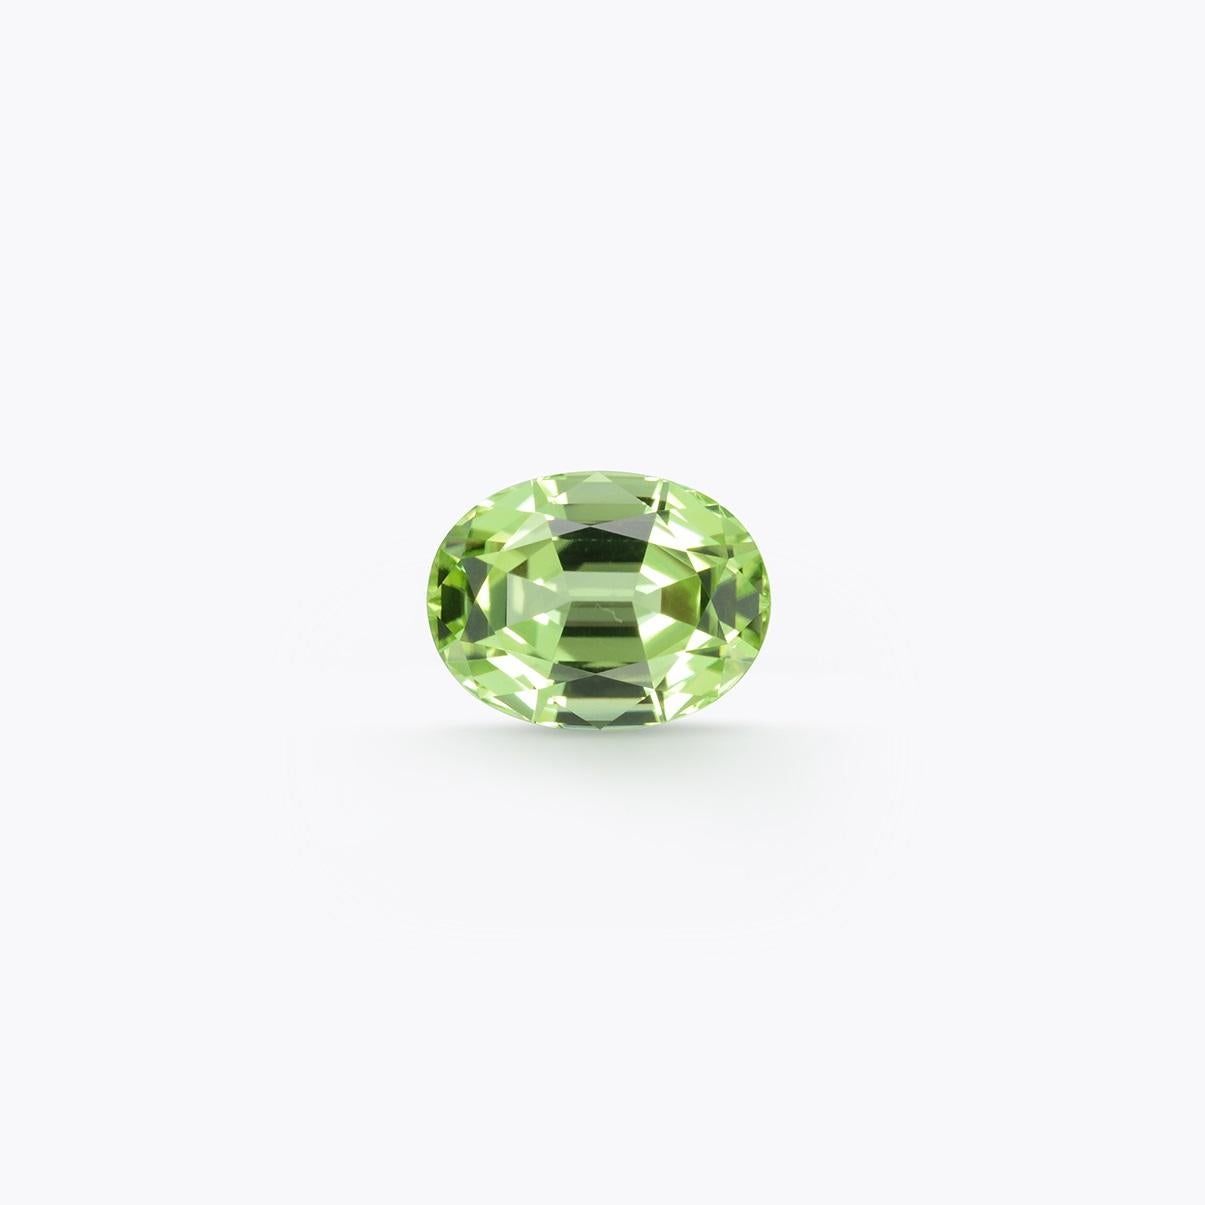 Unusual 3.41 carat vibrant mint Peridot gem, offered loose to a lady or gentleman.
Returns are accepted and paid by us within 7 days of delivery.
We offer supreme custom jewelry work upon request. Please contact us for more details.
(Rings,